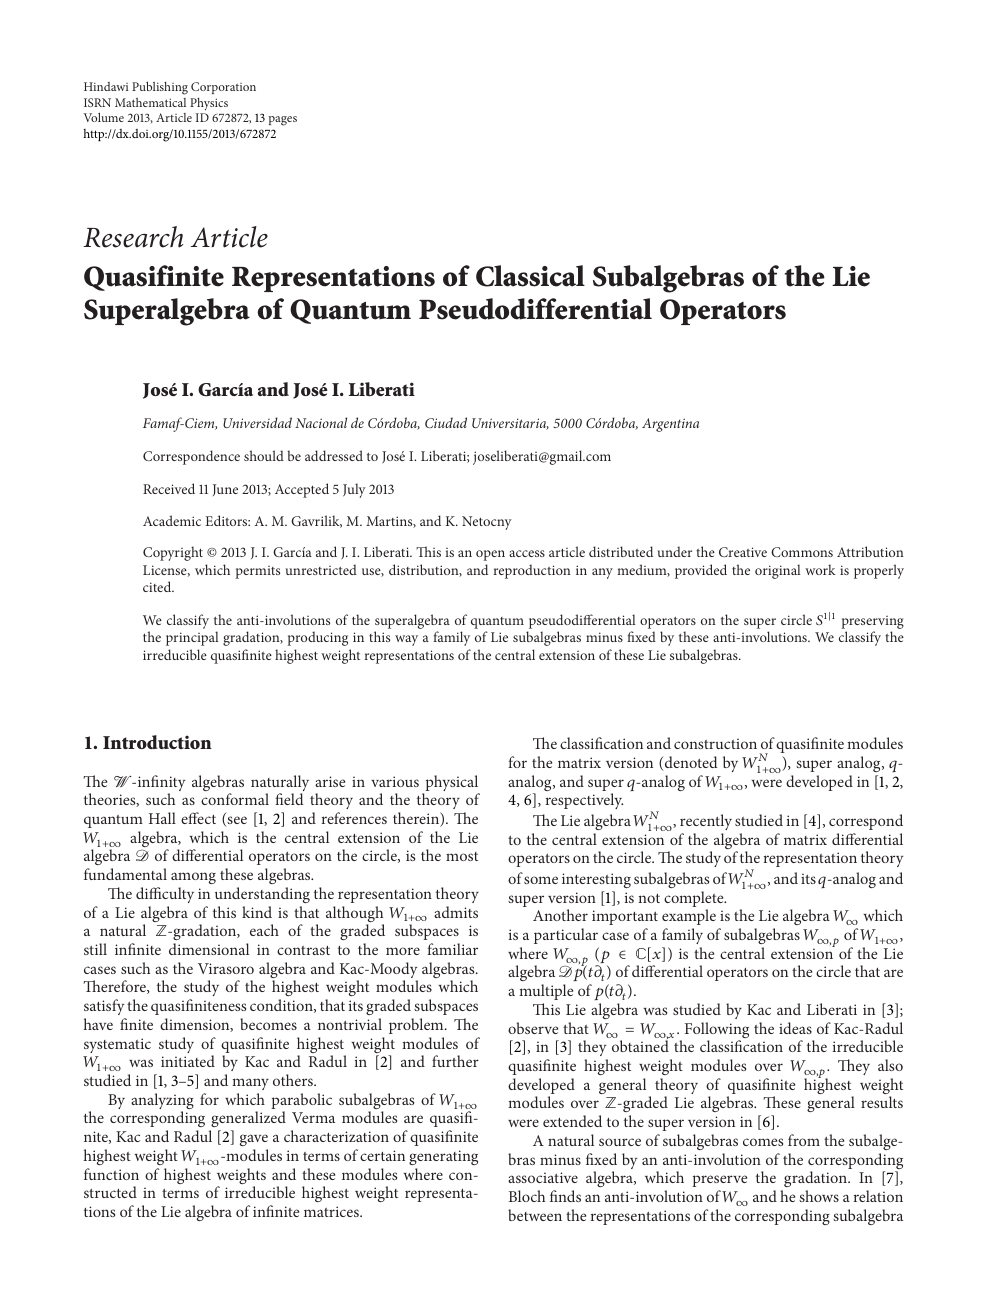 Quasifinite Representations Of Classical Subalgebras Of The Lie Superalgebra Of Quantum Pseudodifferential Operators Topic Of Research Paper In Mathematics Download Scholarly Article Pdf And Read For Free On Cyberleninka Open Science